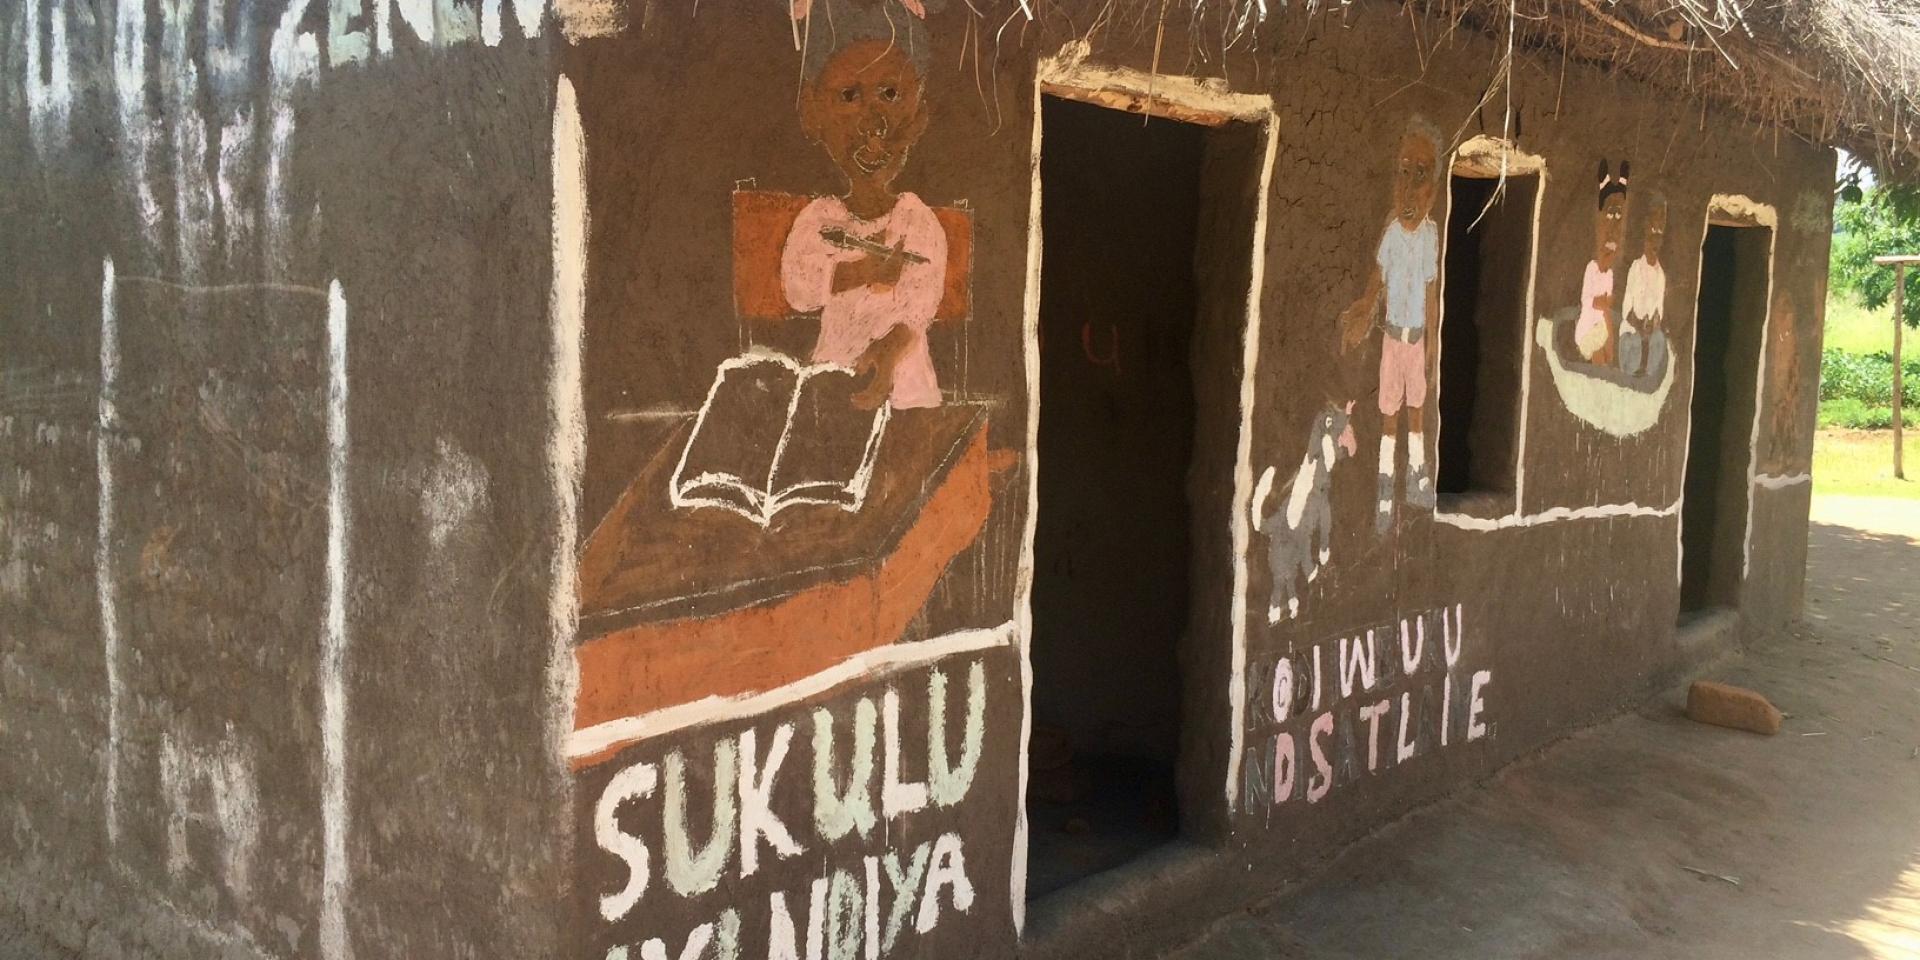 Nutrition center in Malawi